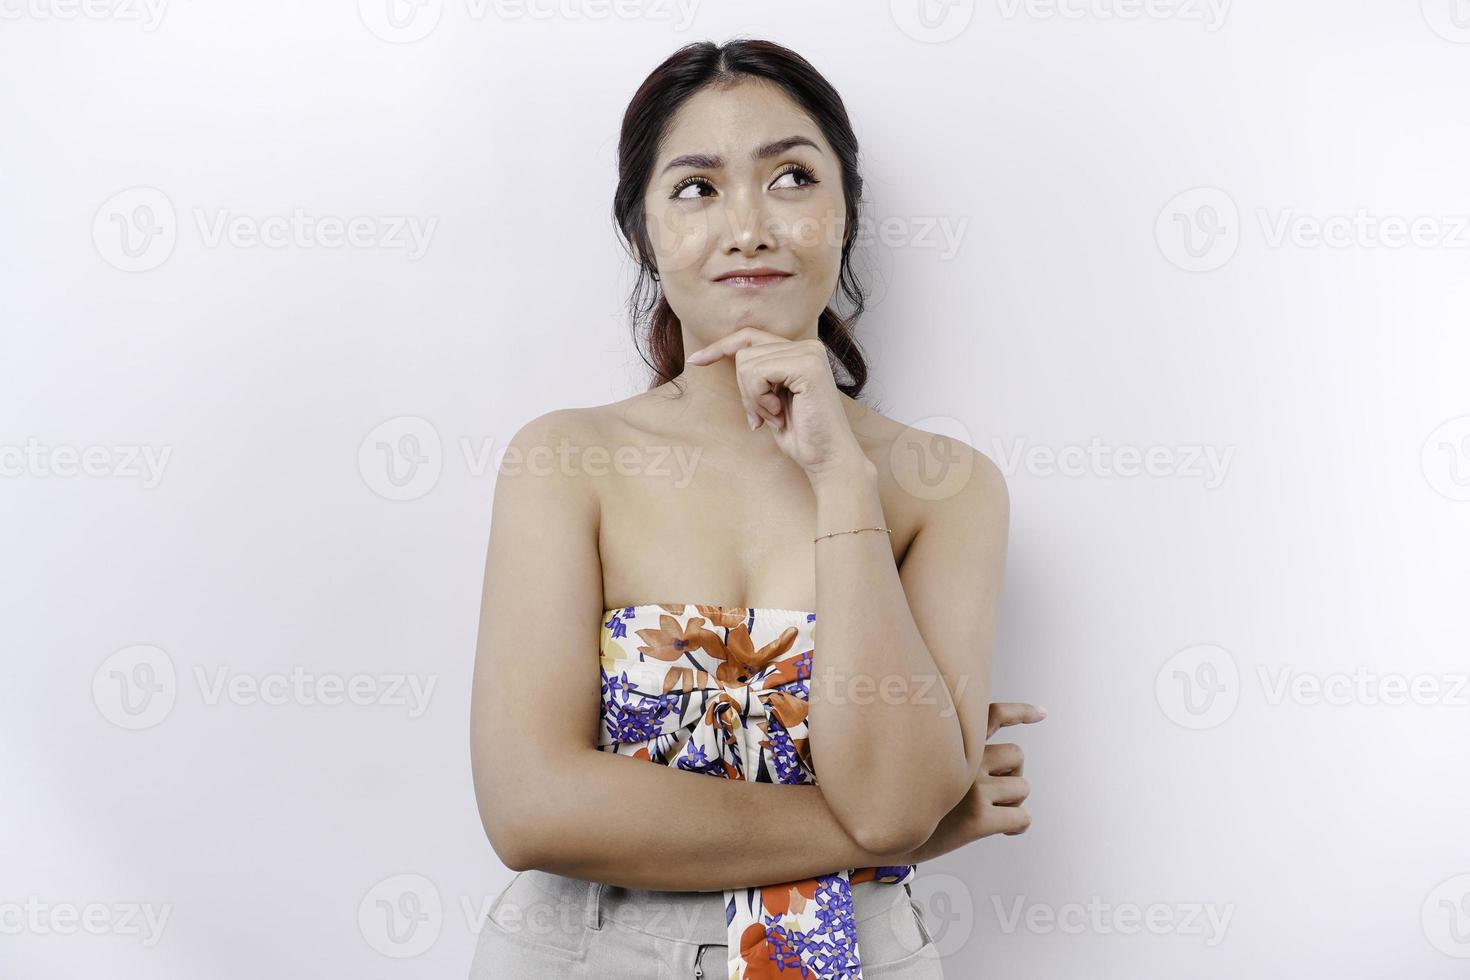 A thoughtful young woman while looking aside, isolated by white background photo